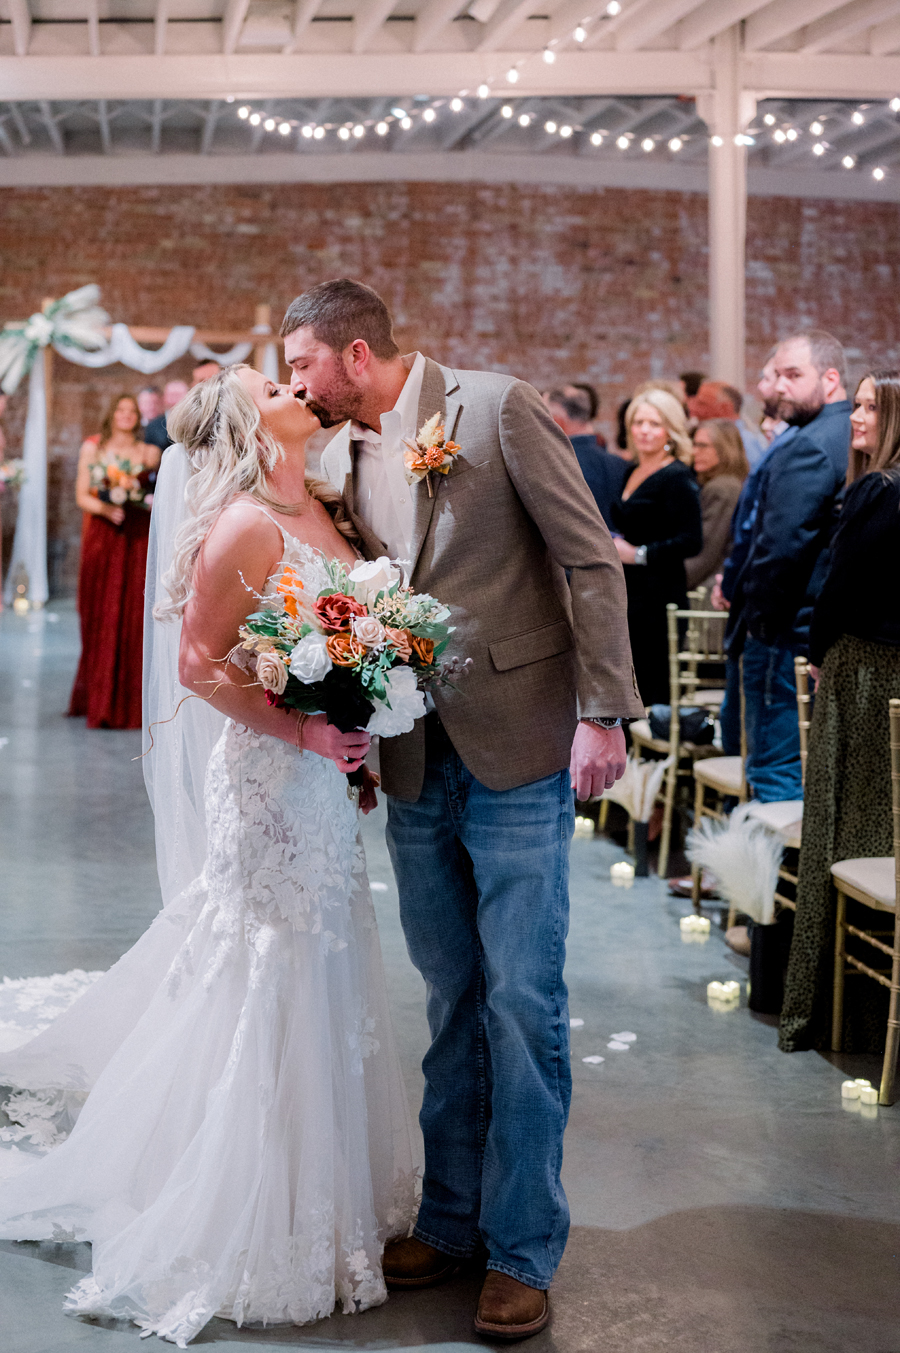 A bride and groom exchange vows for their wedding at Atrium on Tenth wedding in Columbia, Missouri by Love Tree Studios.